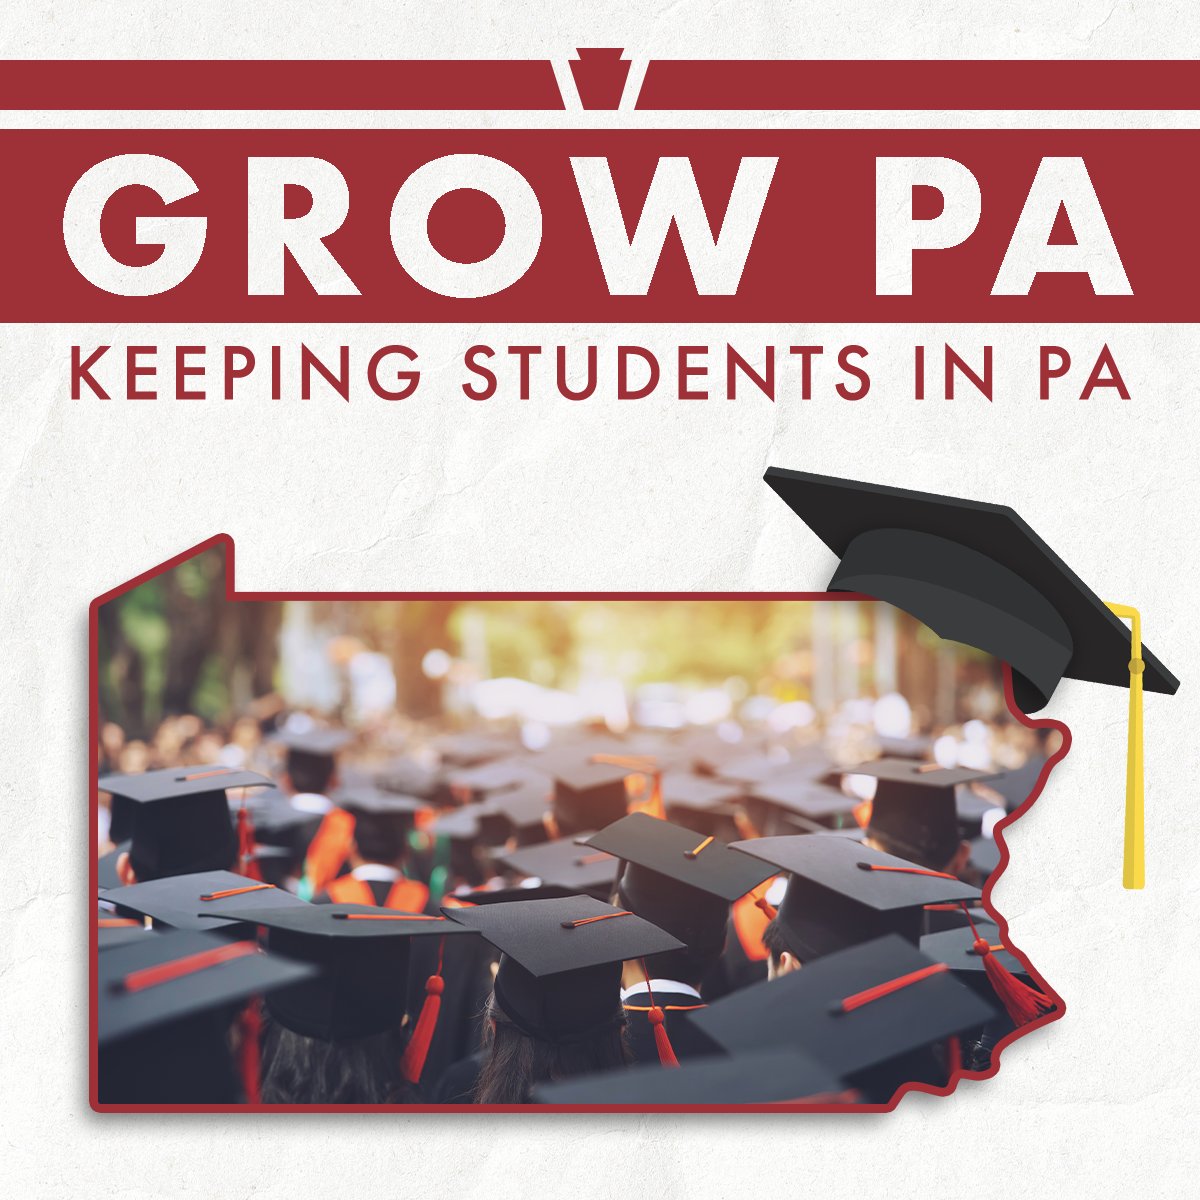 We believe we need to encourage more students to learn here, put down roots here, work here, and grow here. Read our plan to keep students in PA: bit.ly/4aPE02J @SenatorMartinPA @SenatorArgall @Sen_Pennycuick